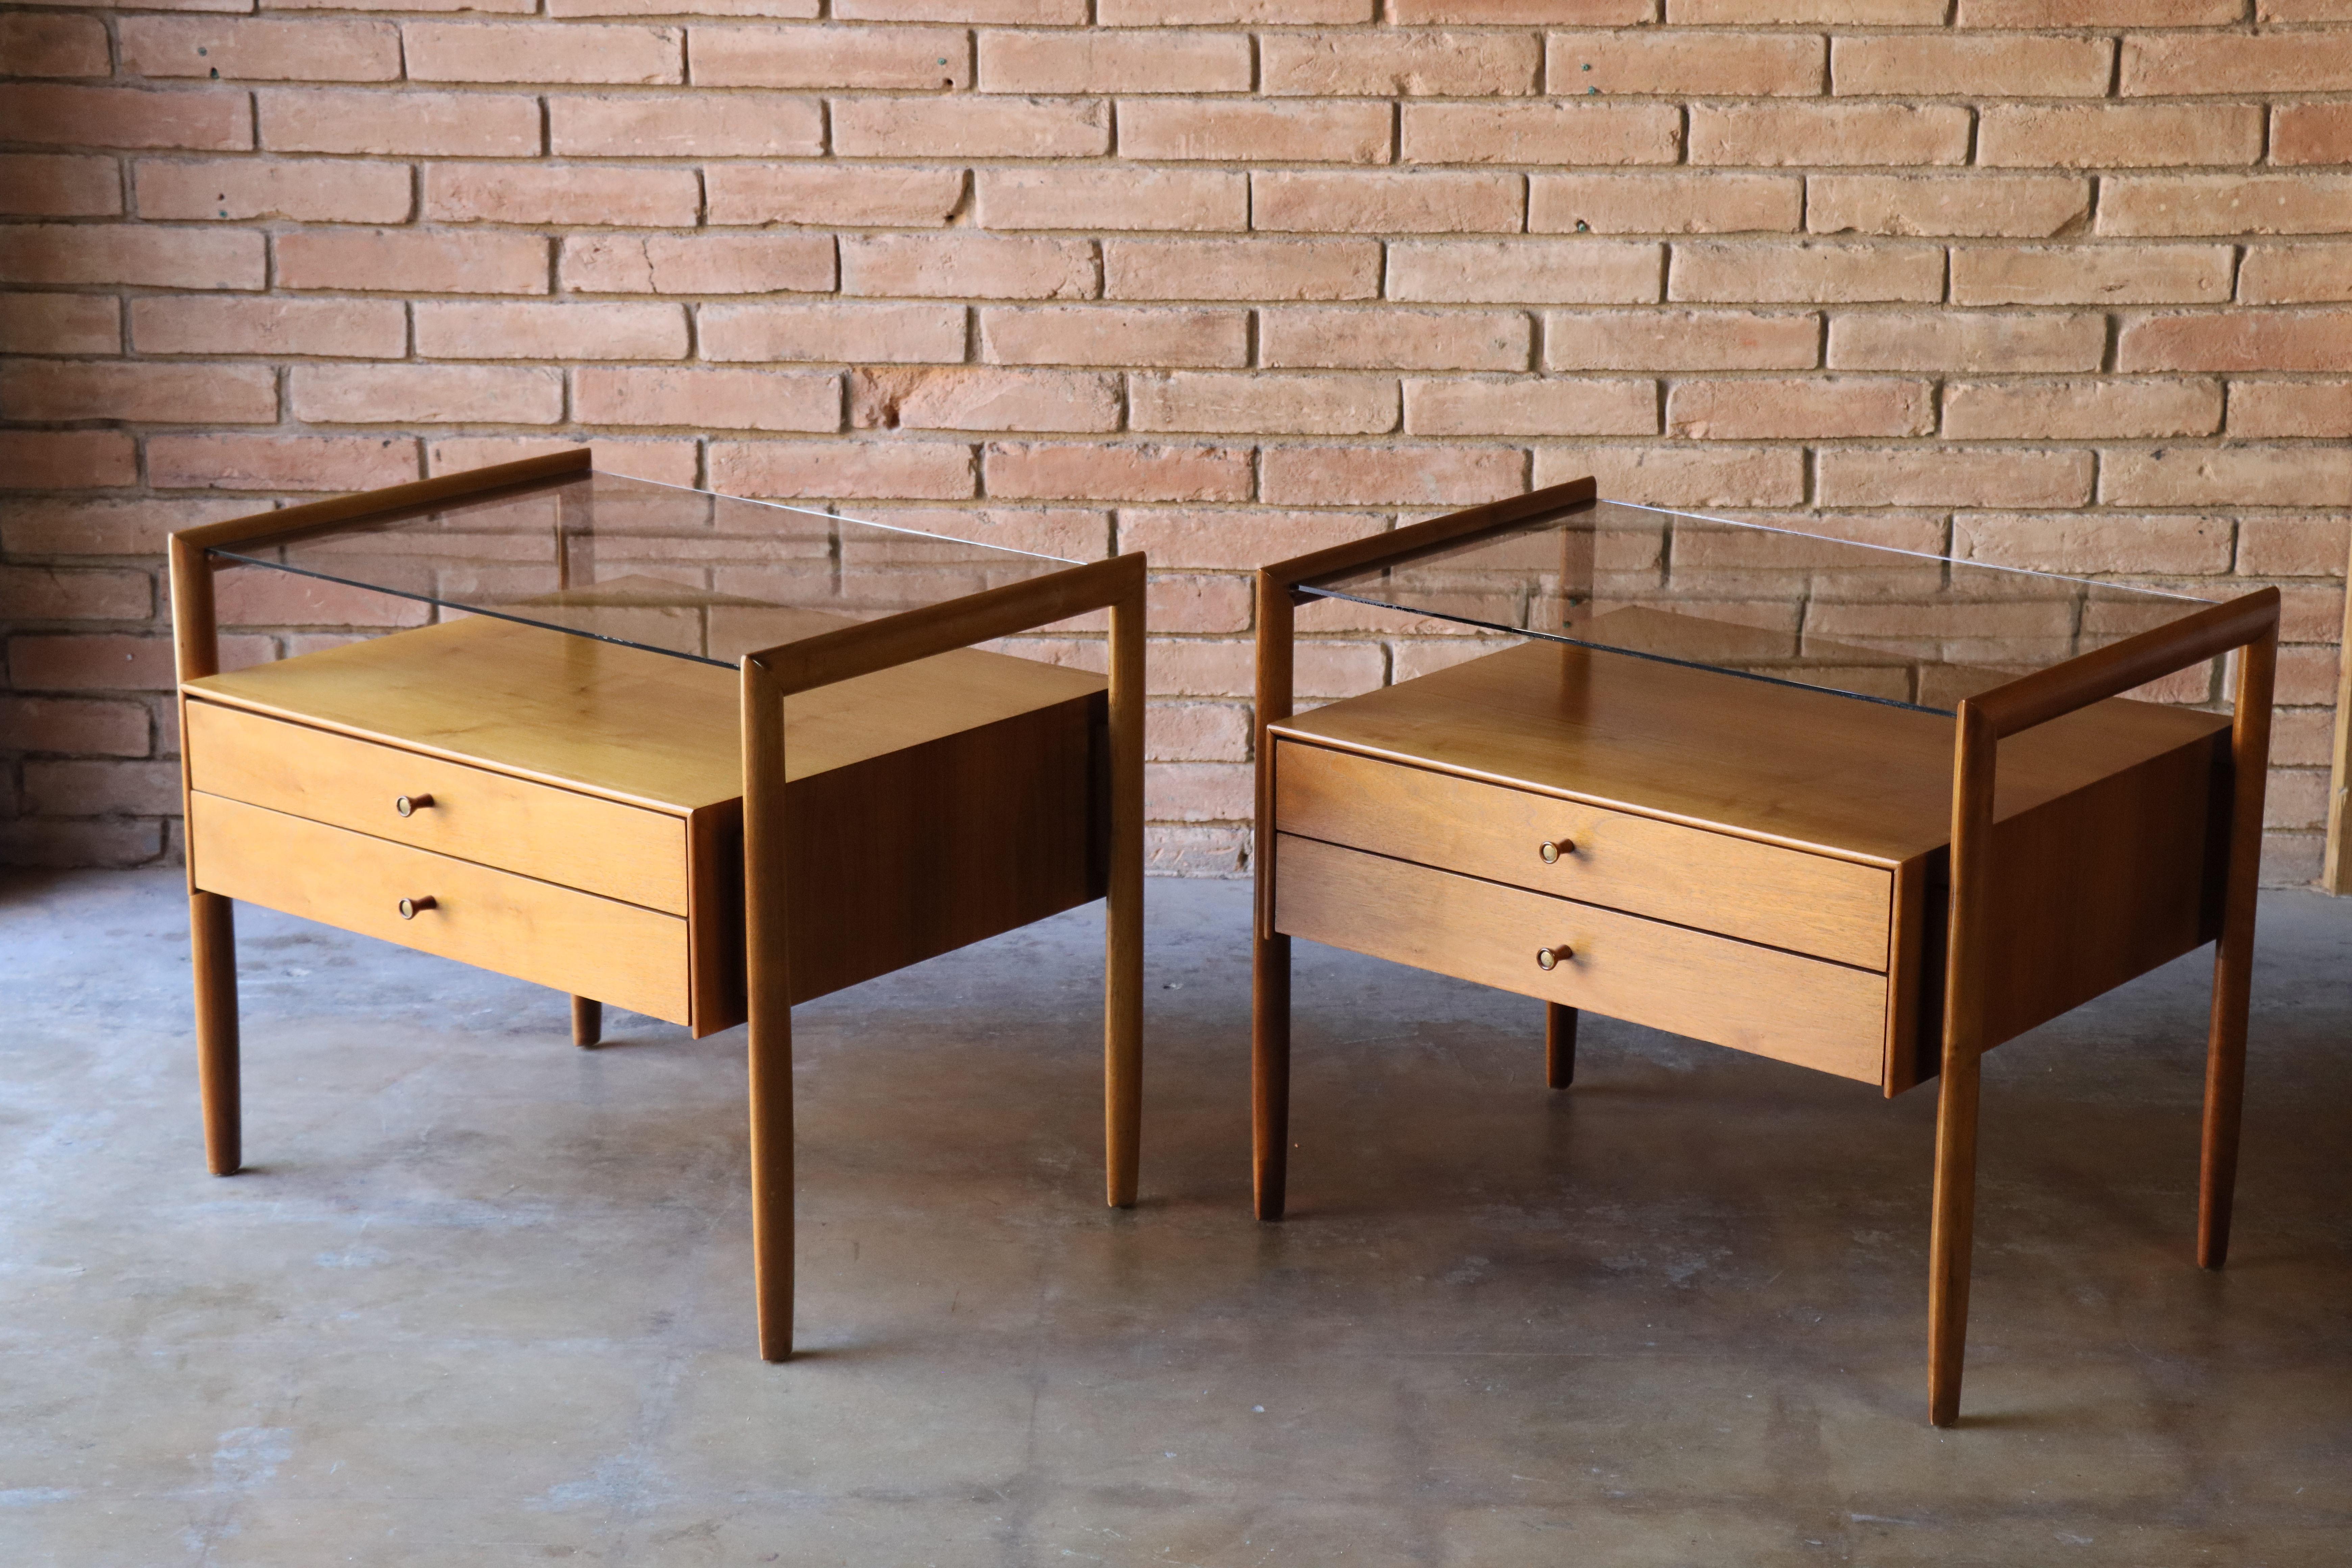 Rare pair of nightstands designed by Barney Flagg for Drexel, c. 1960s. Part of Drexel’s ‘Parallel’ series, these beautiful examples are made from rich walnut and glass tops. The solid walnut frames suspend the floating cabinets and glass tops